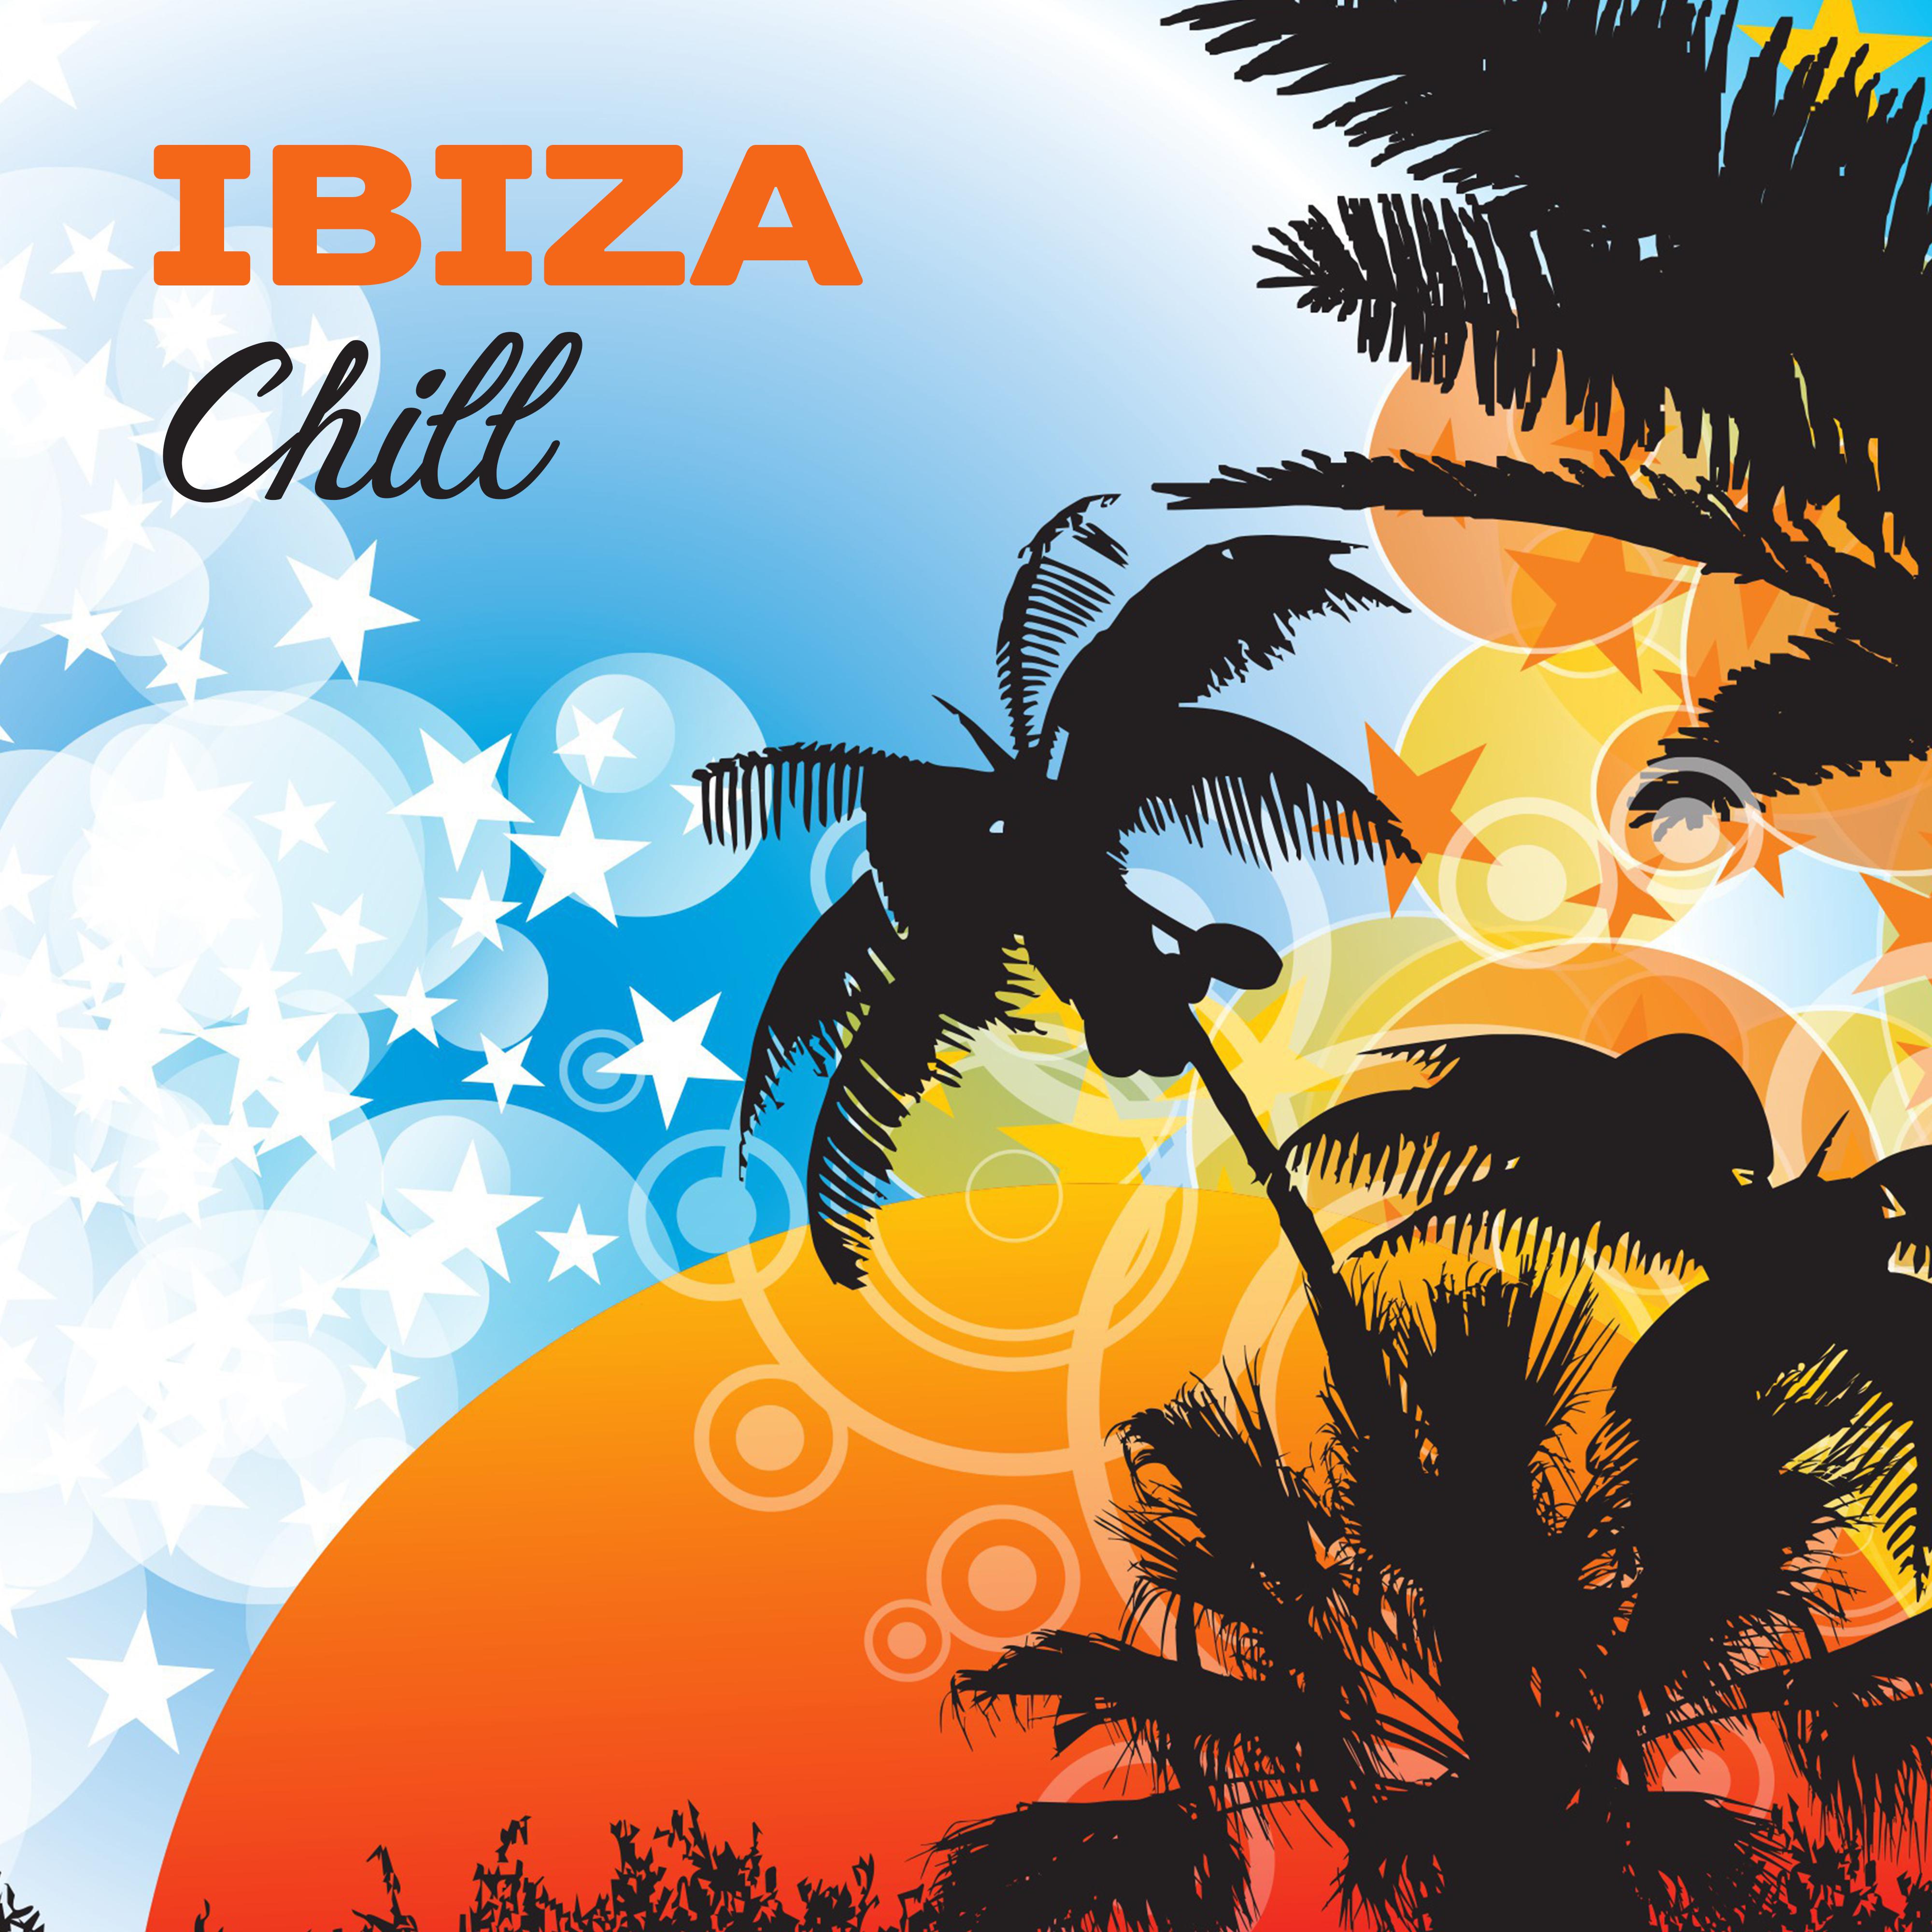 Ibiza Chill – Relaxing Chill Out Music, Calming Sounds, Tropical Island, Mind Rest